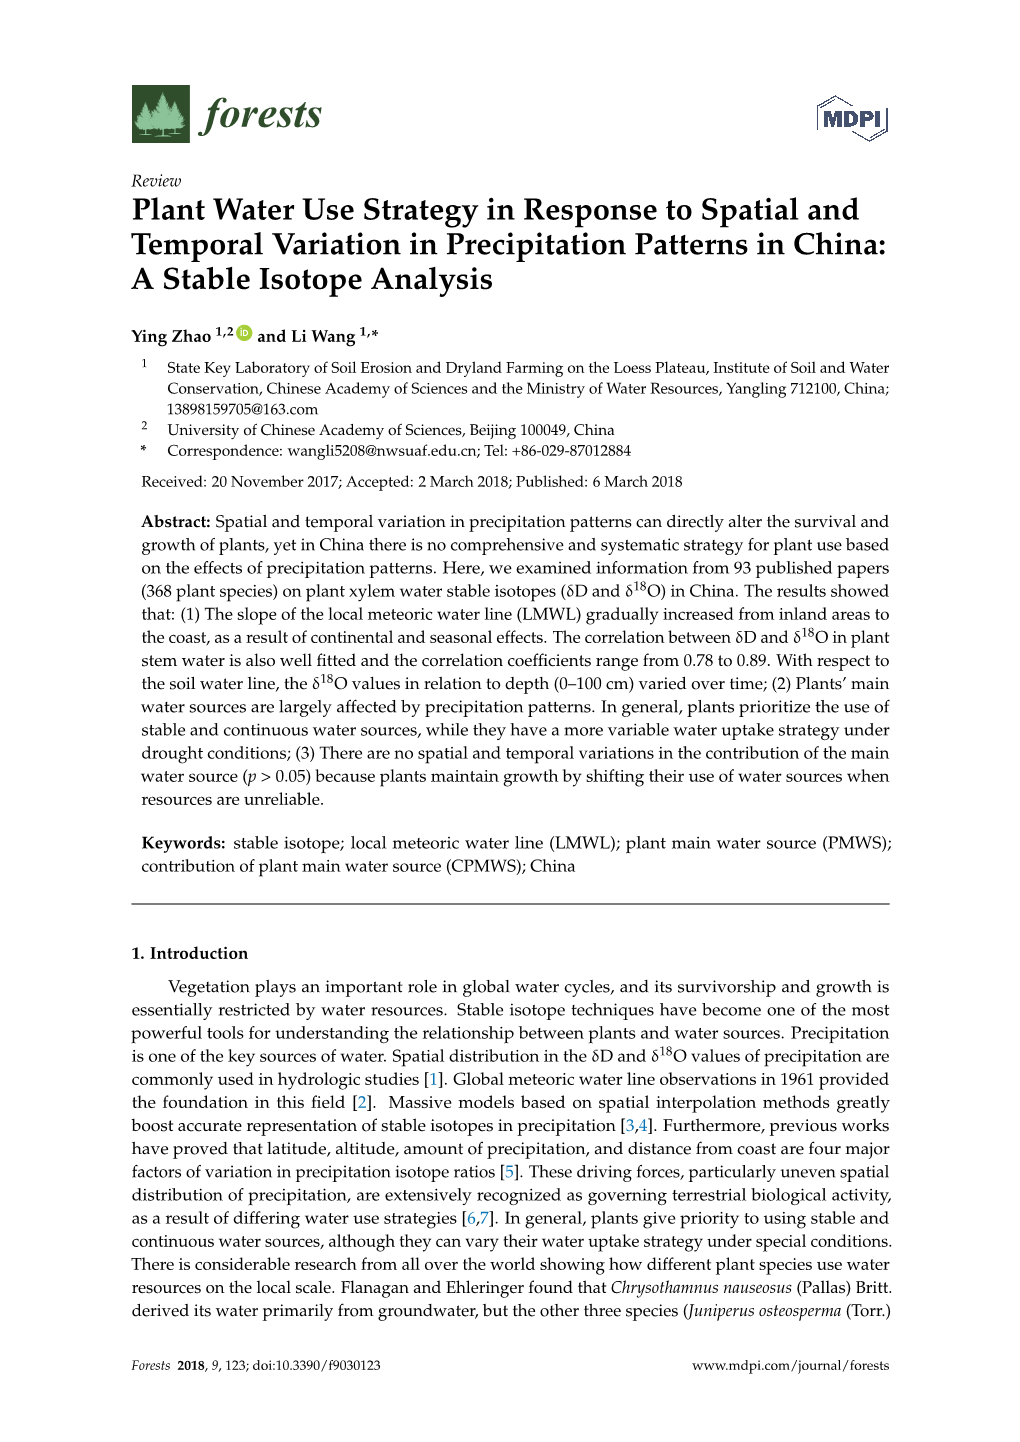 Plant Water Use Strategy in Response to Spatial and Temporal Variation in Precipitation Patterns in China: a Stable Isotope Analysis